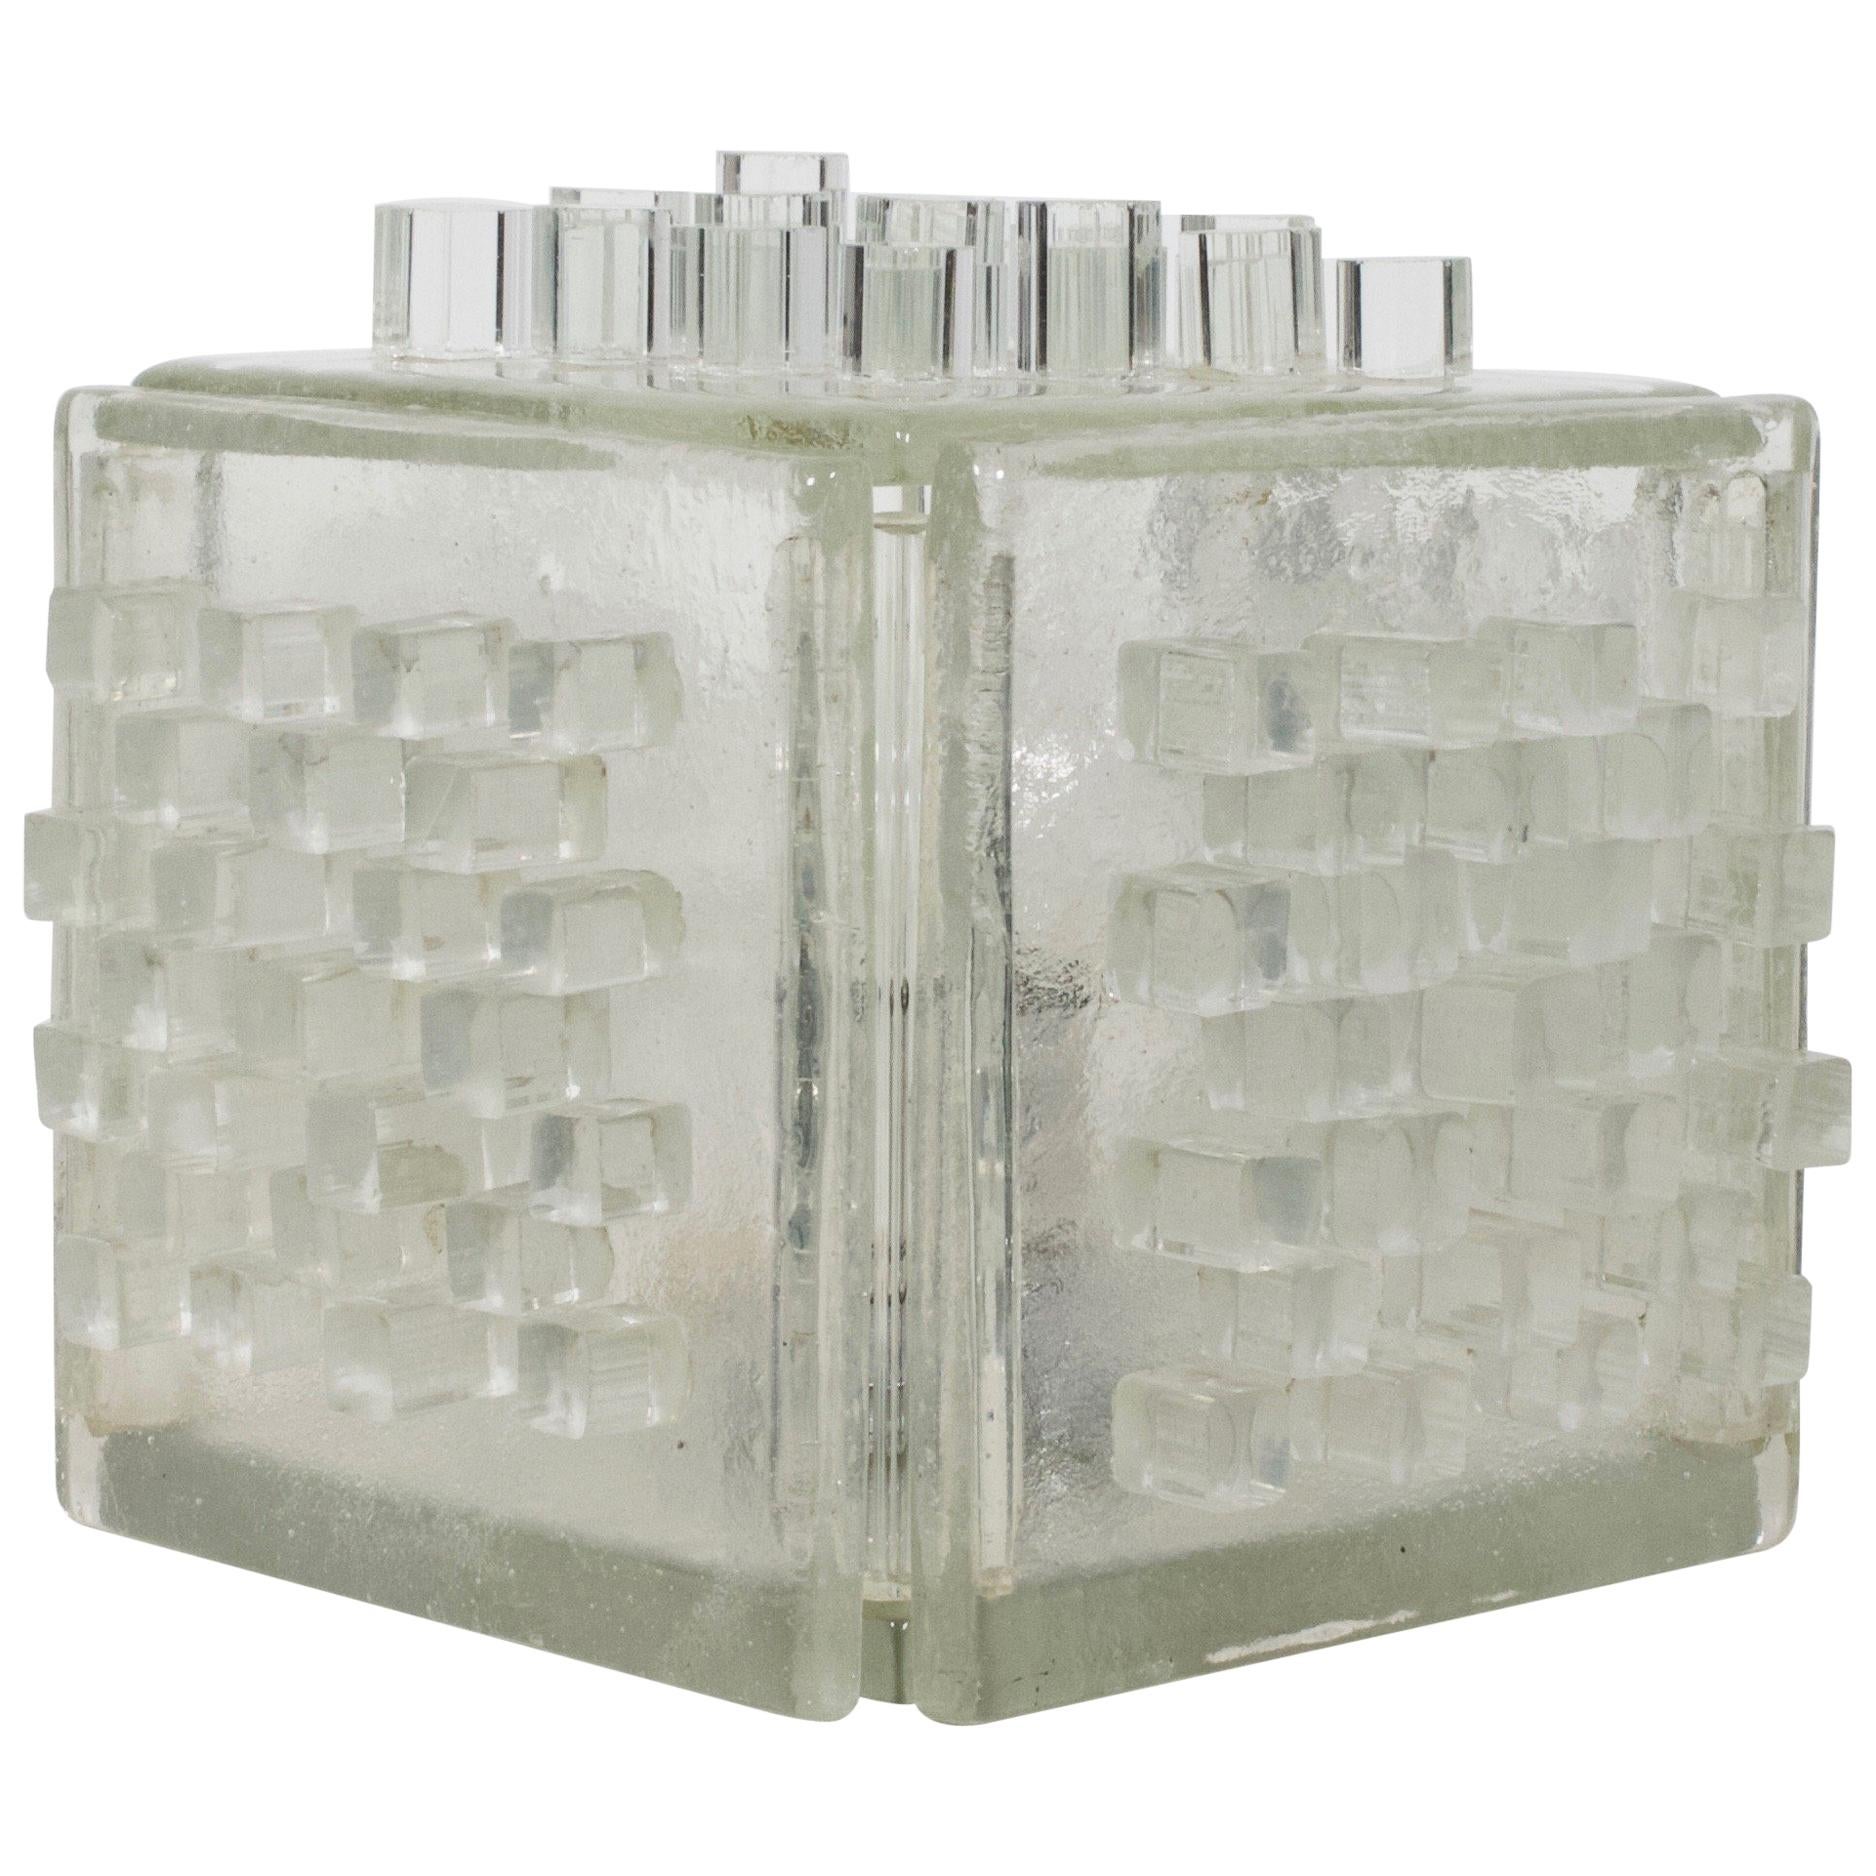 Rare Poliarte ‘Apis’ Table Lamp Made of Raw Crystal, 1960s For Sale